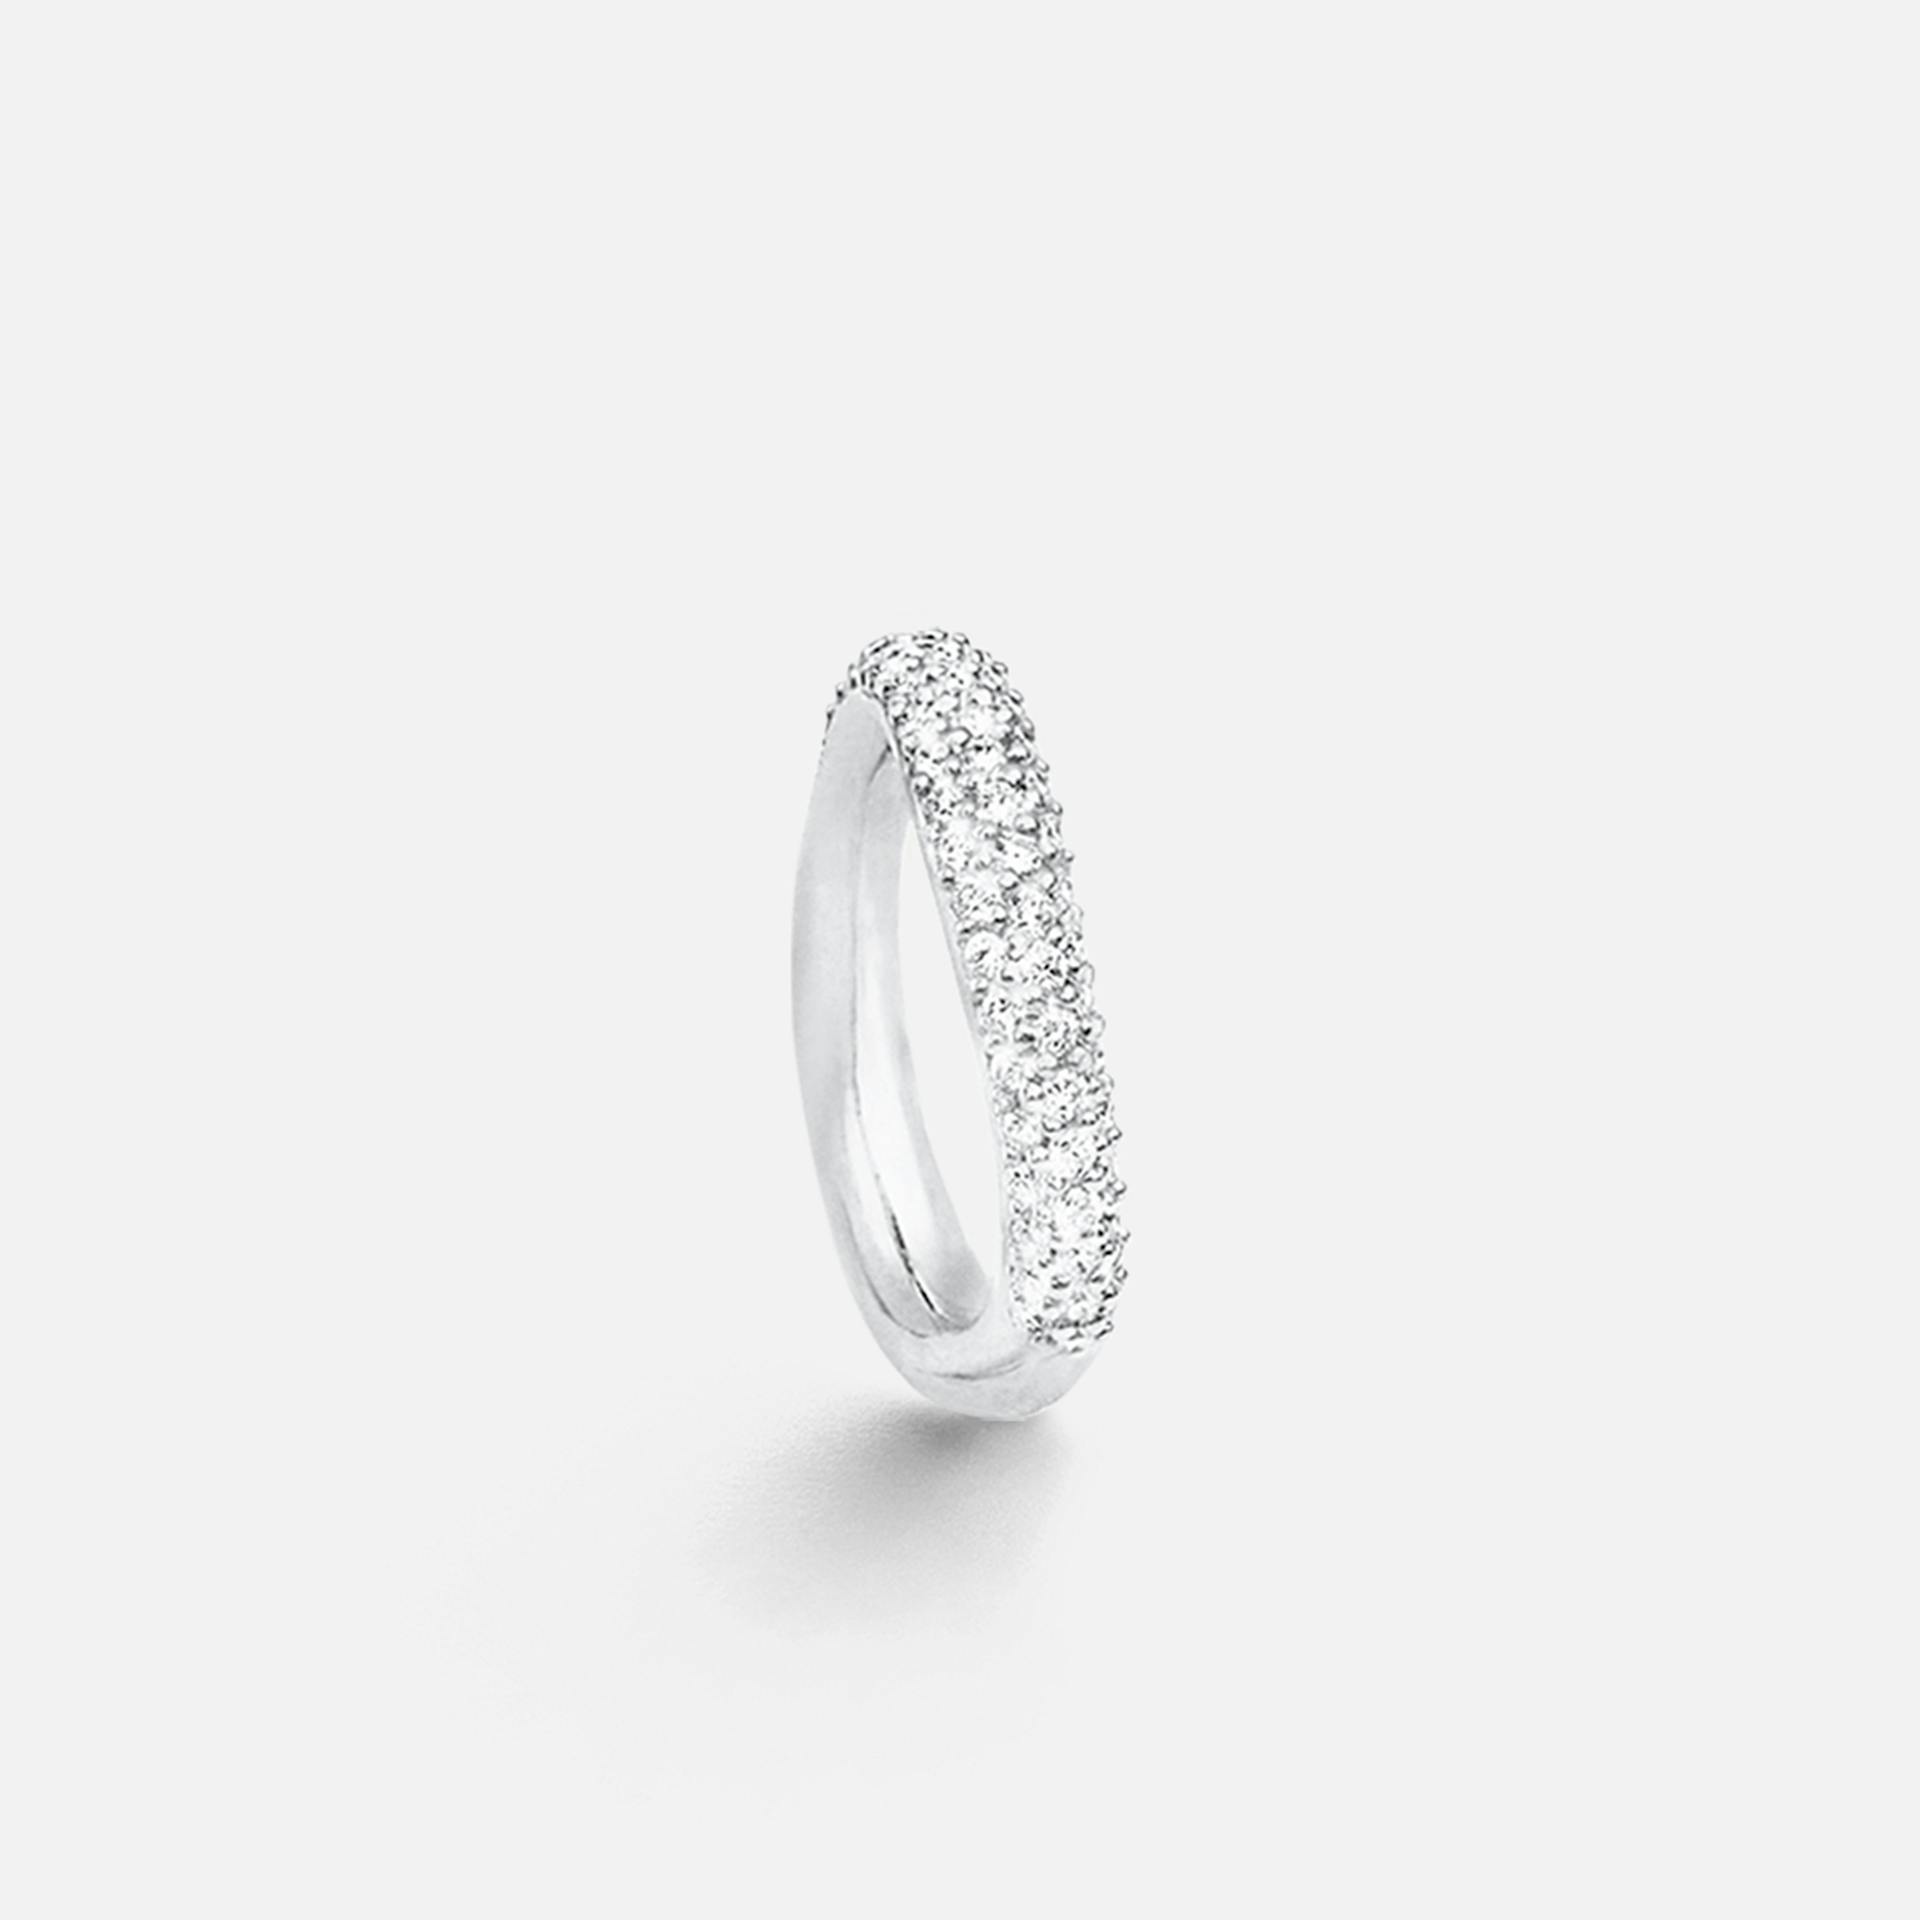 Love Ring No 4 in Polished White Gold with Diamonds  |  Ole Lynggaard Copenhagen 